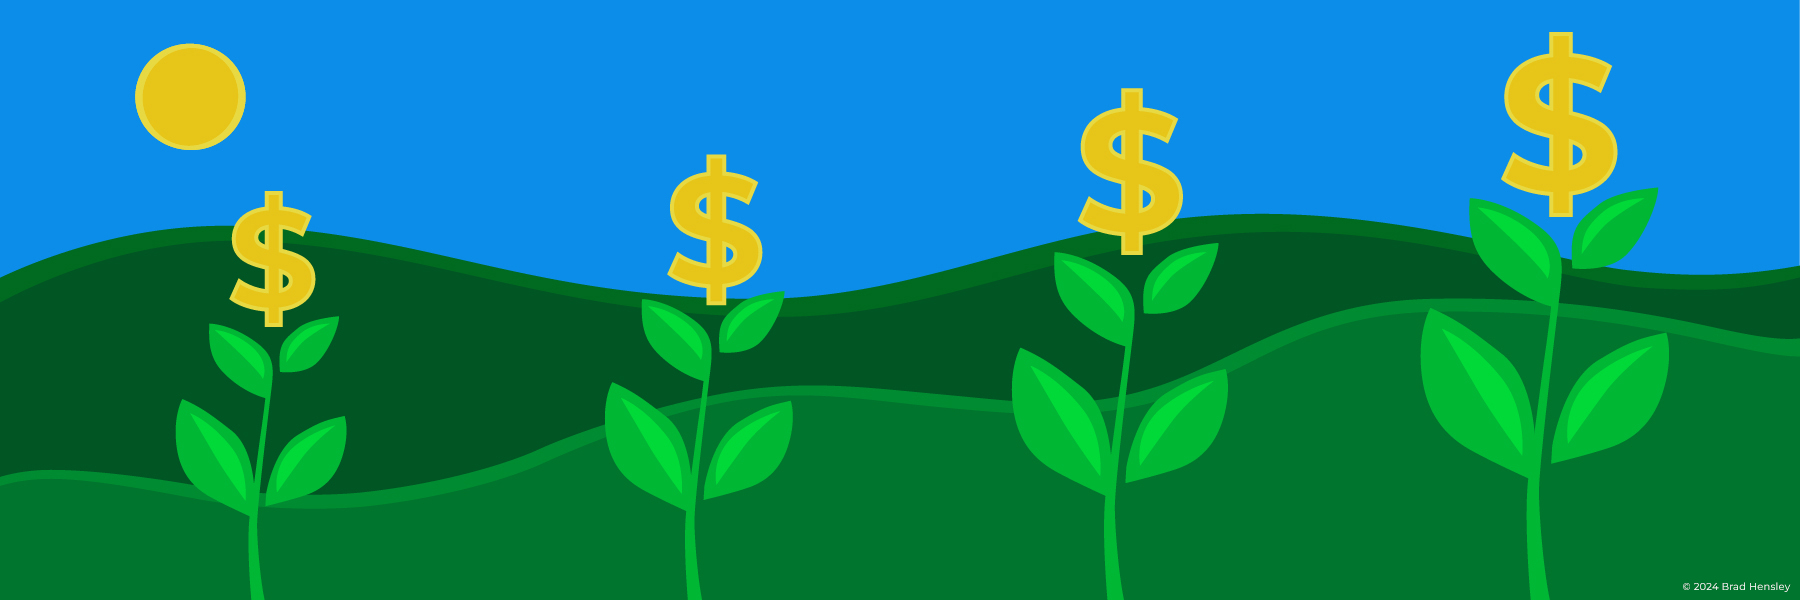 Business Growth through marketing and branding money plants